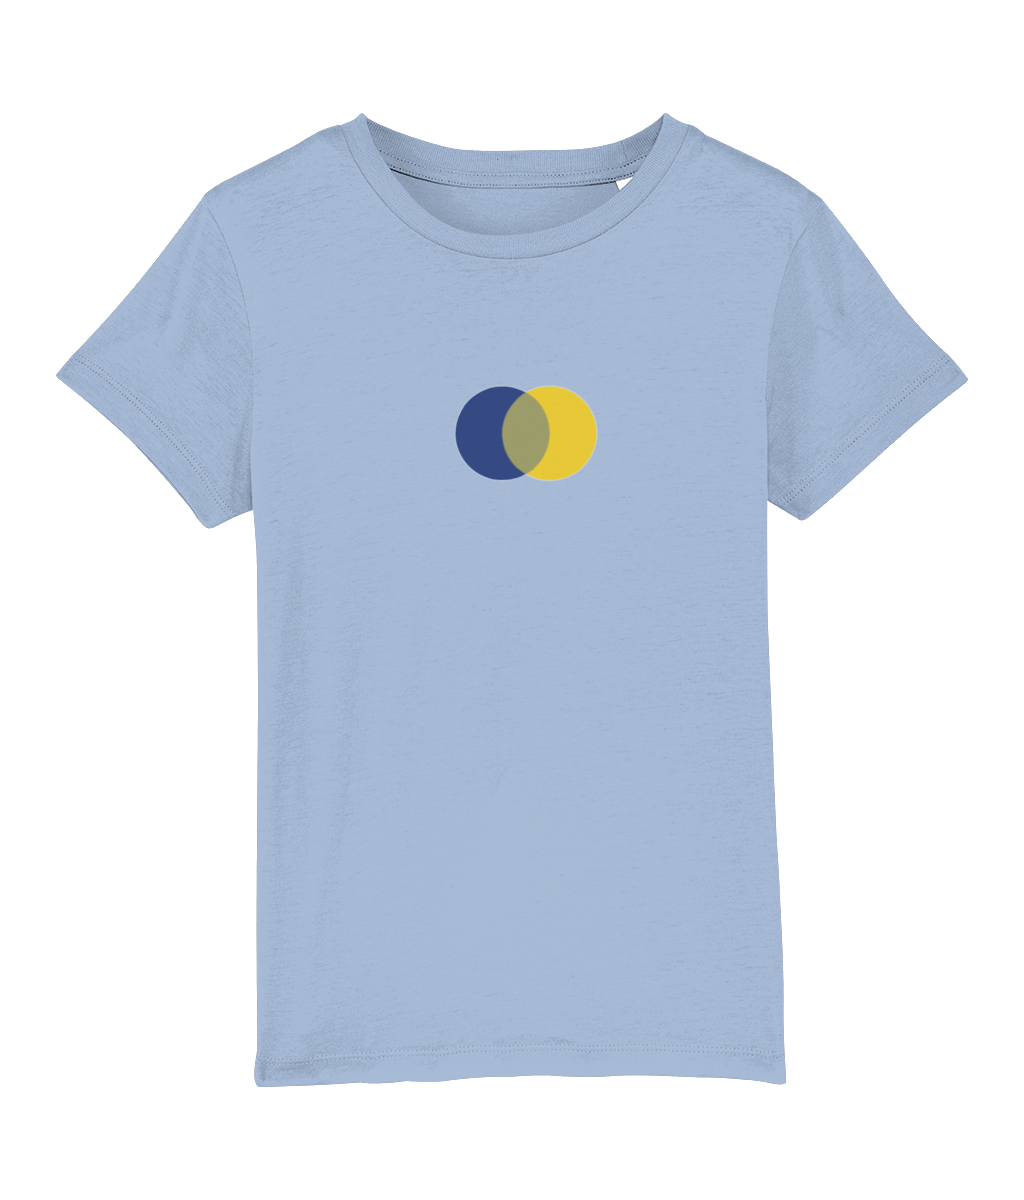 Blue Yellow Makes Green Organic Cotton T Shirt - Buy any 3 get 10% off